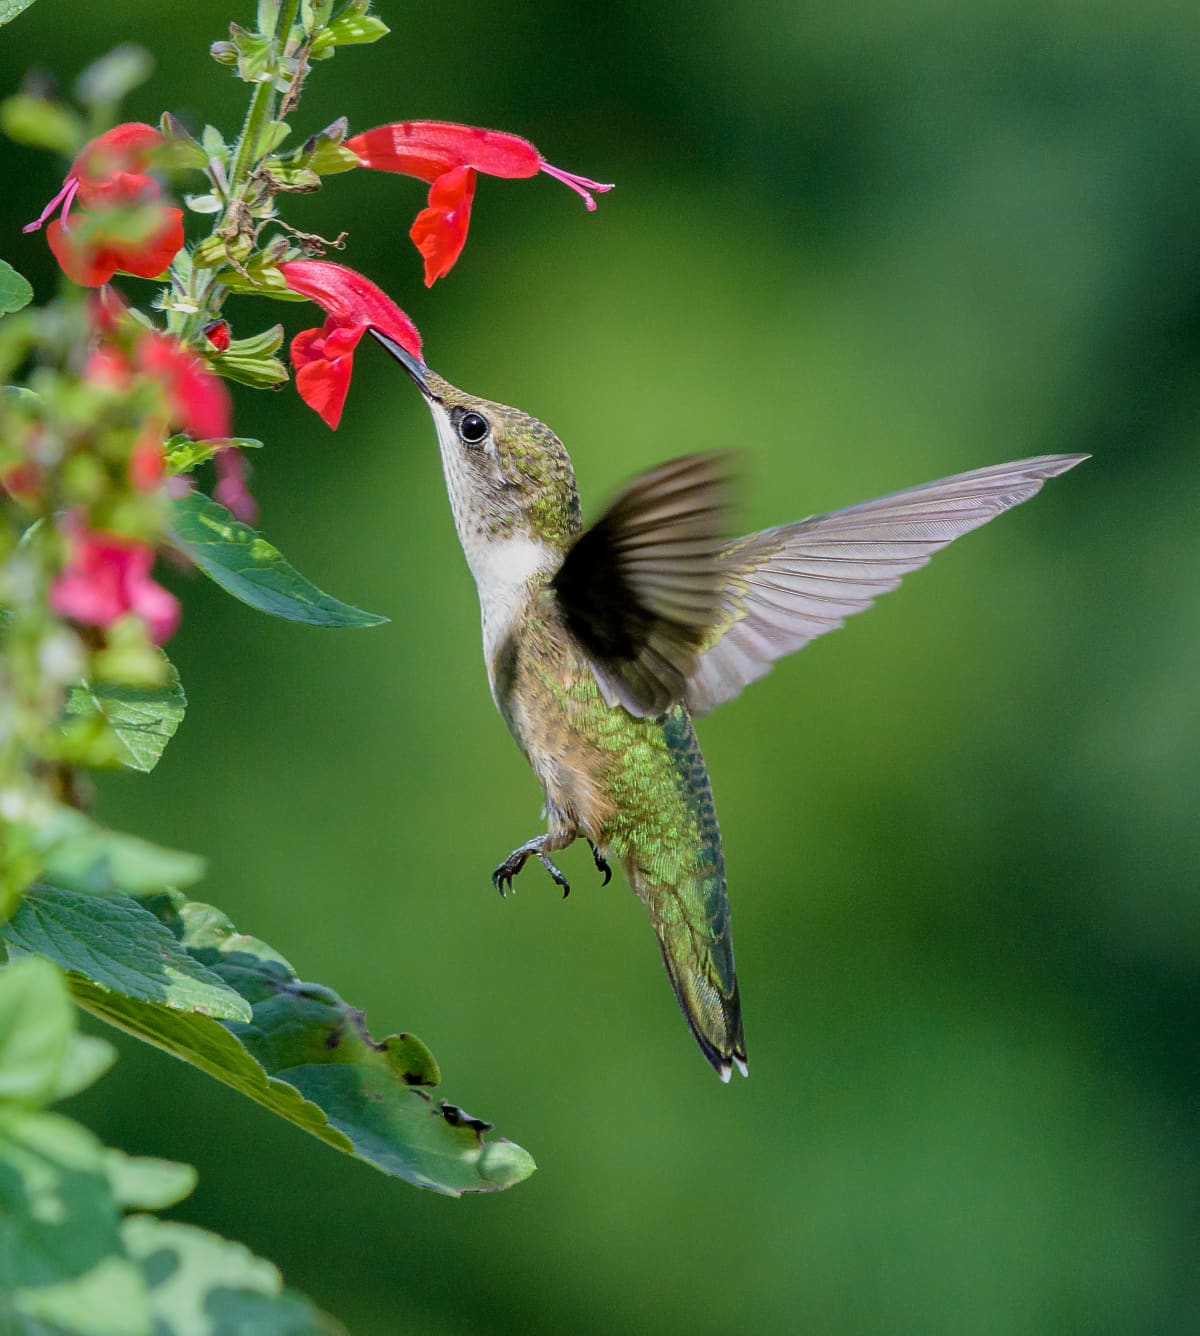 close-up of a hummingbird in flight in costa rica with an insect in its beak.